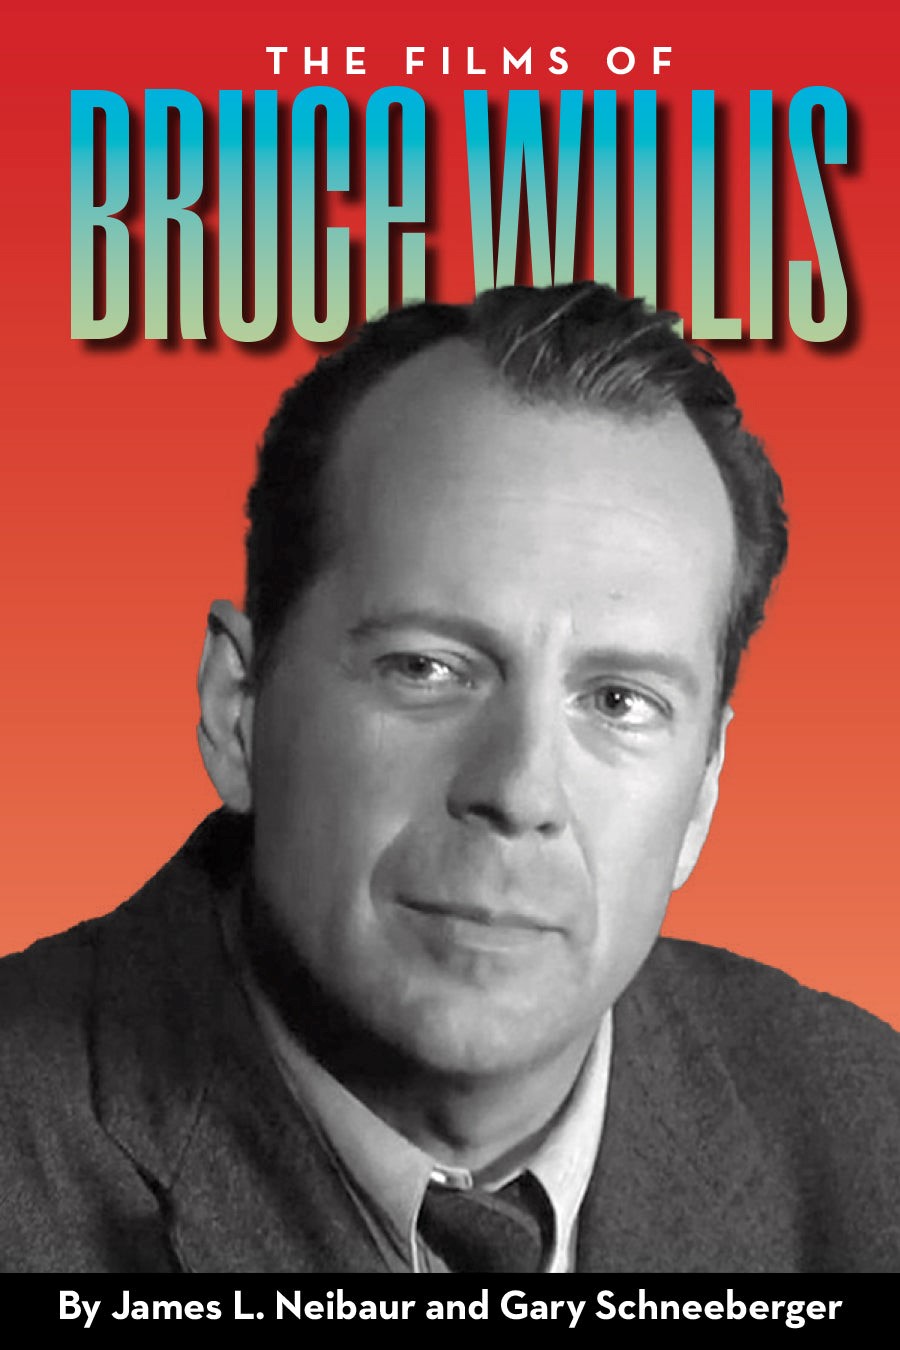 The Films of Bruce Willis